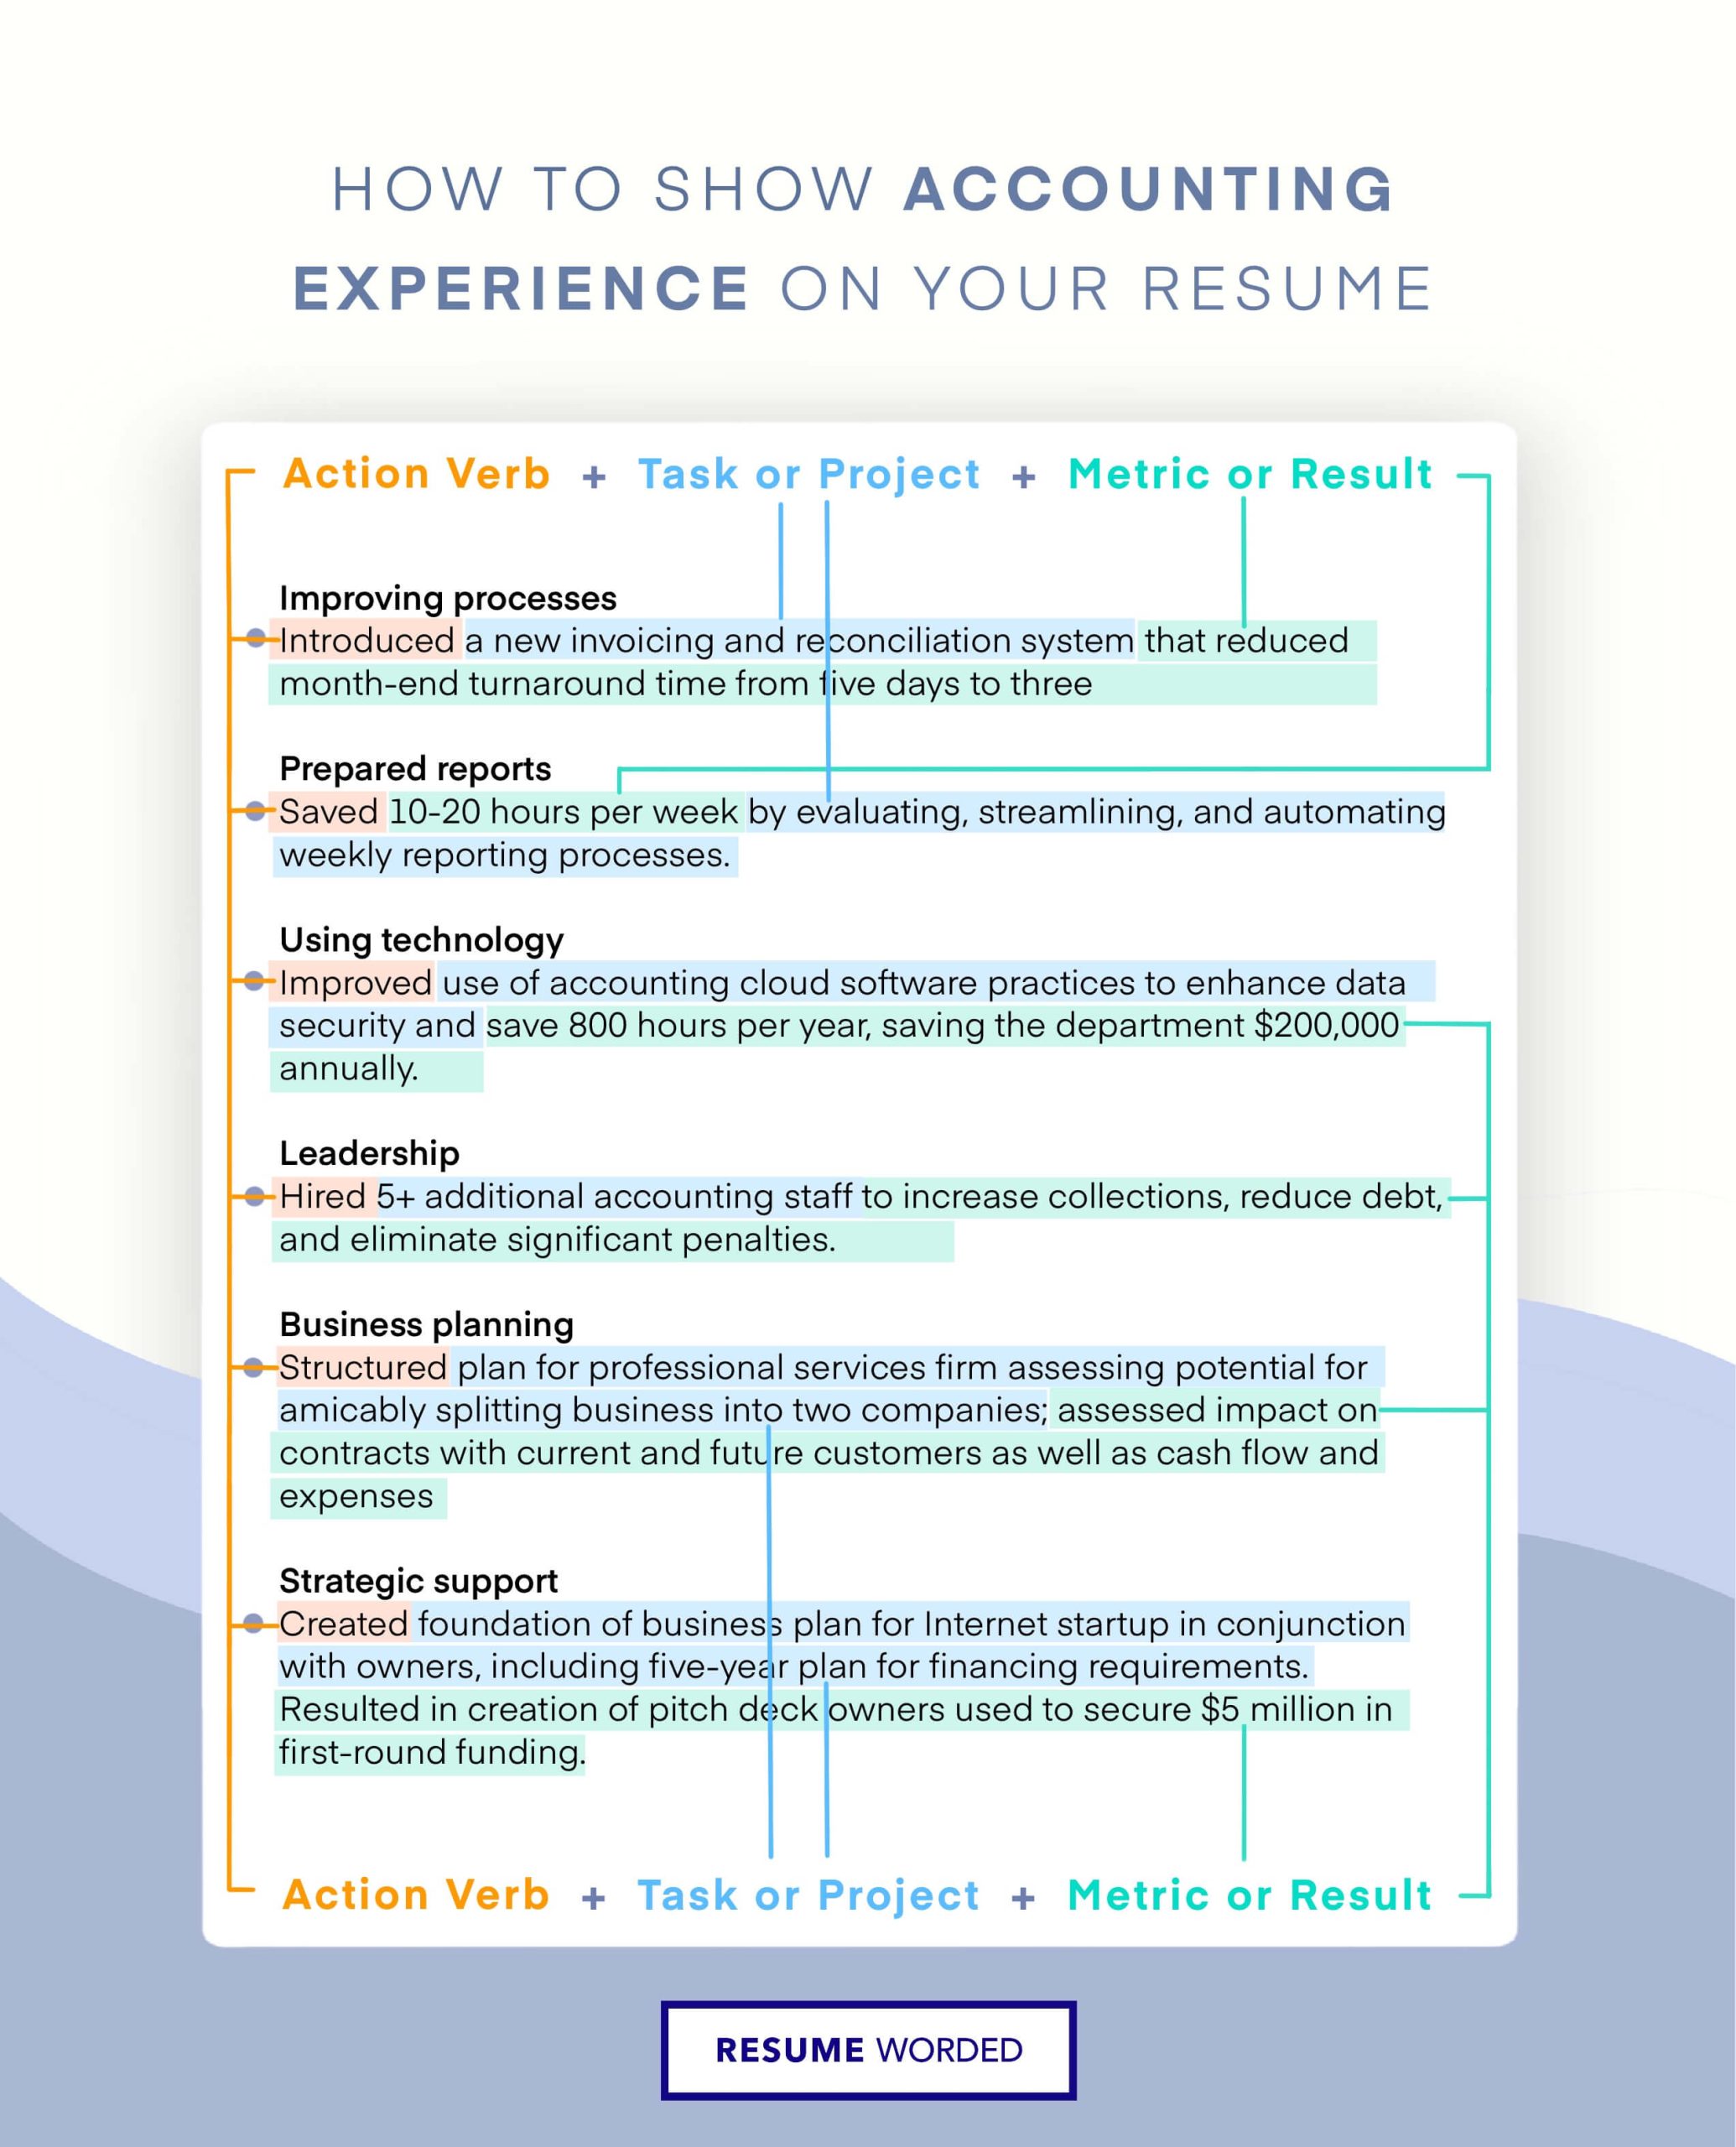 Sample Resume Duties Accomplishments and Related Skills Accountant Cpa Field 22 Accountant Resume Examples for 2022 Resume Worded